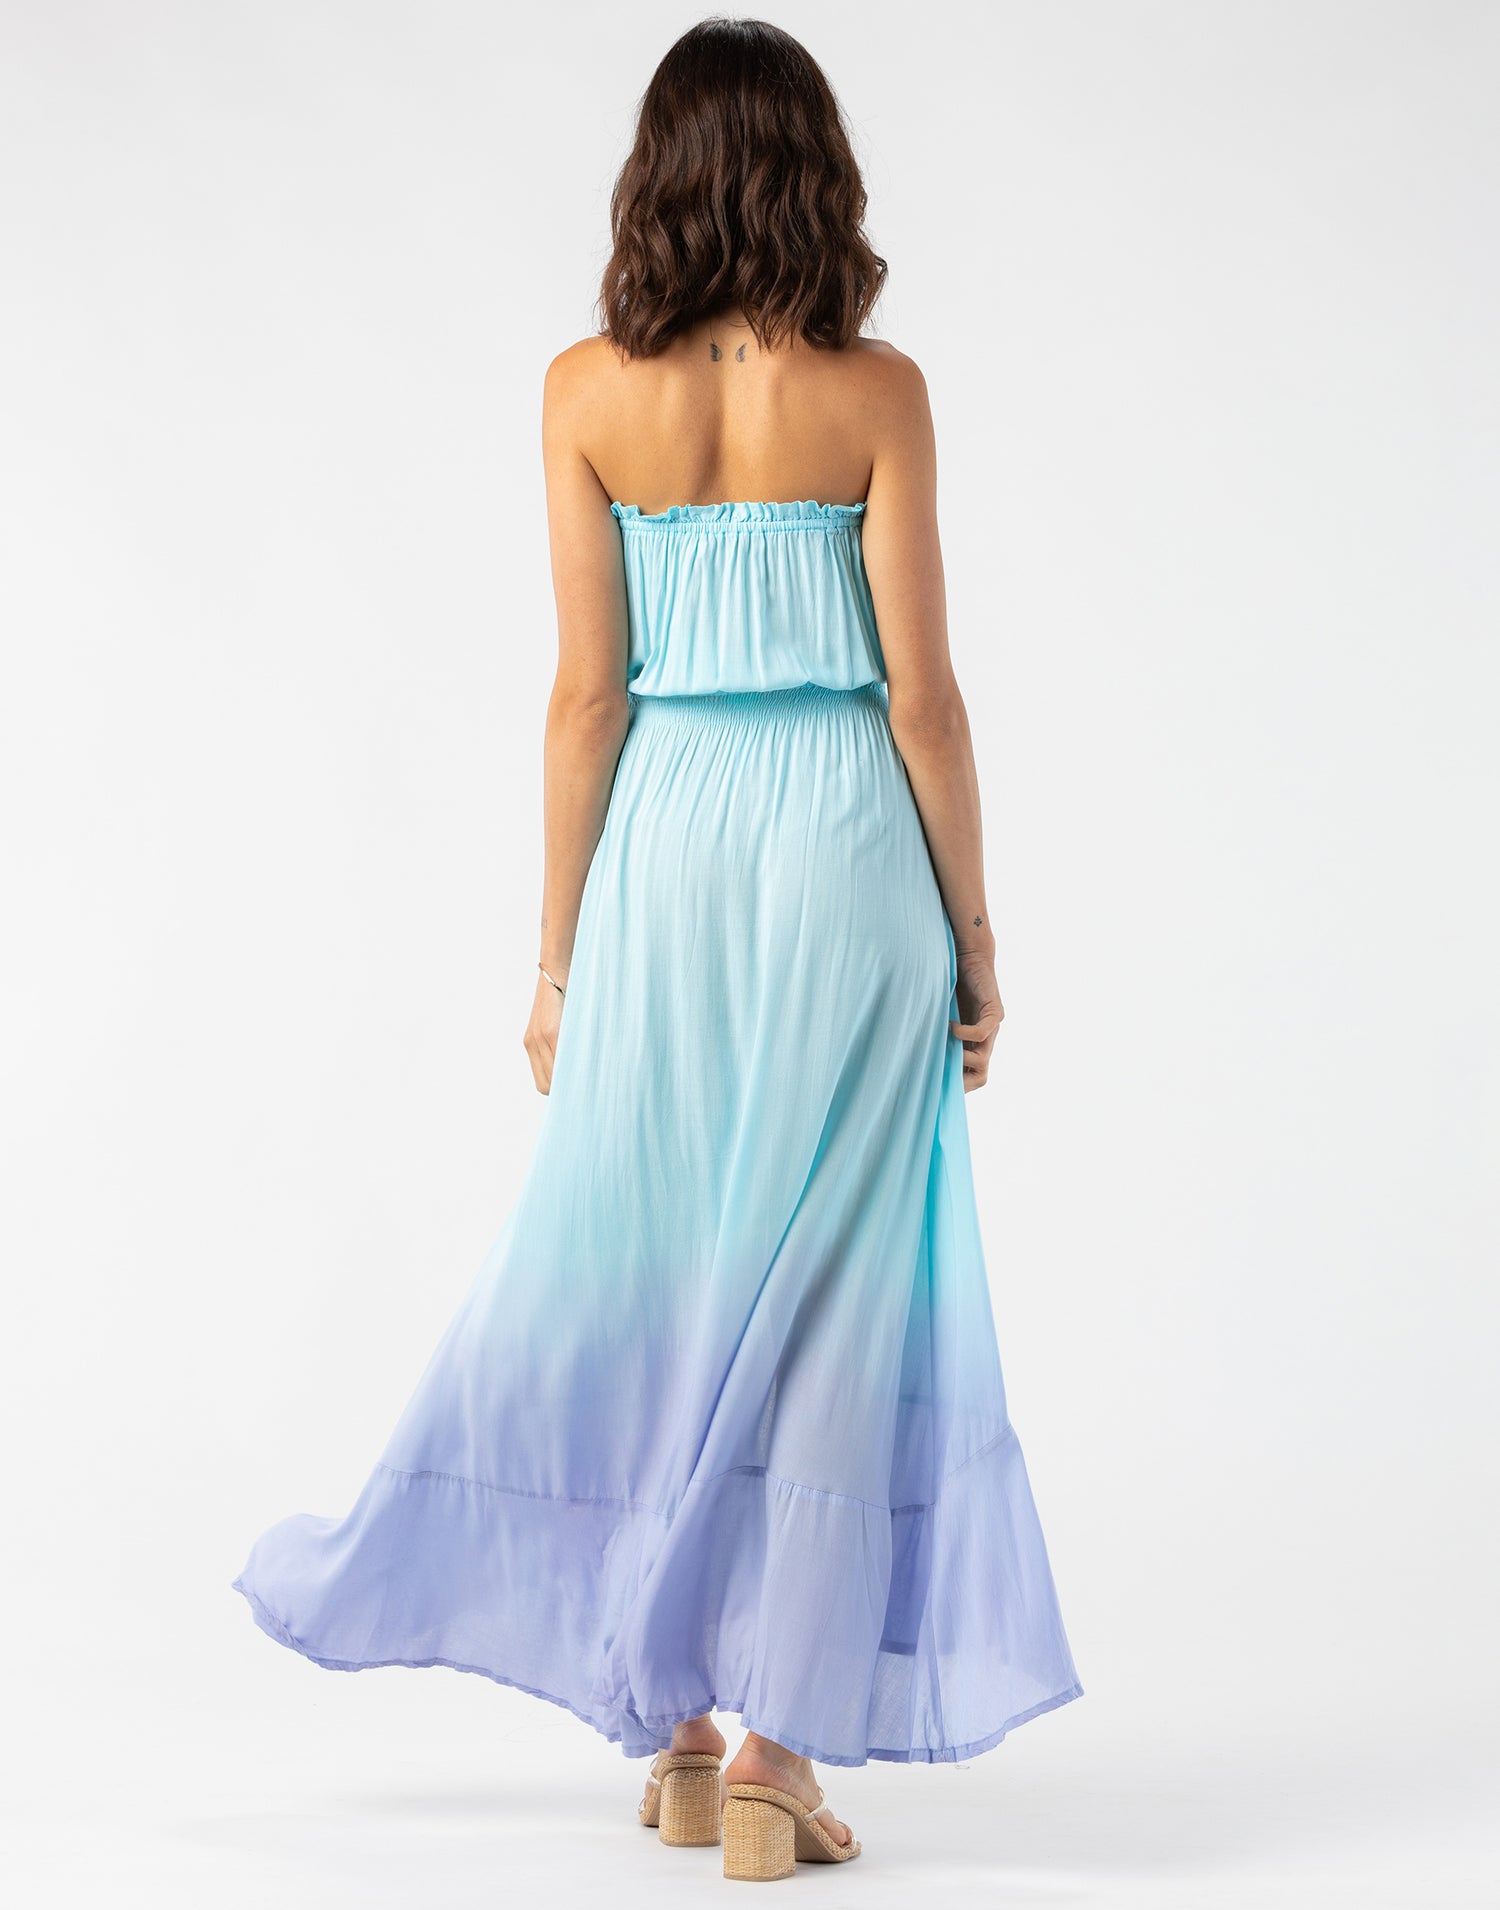 Ryden Maxi Dress by Tiare Hawaii in Aqua Lavender Ombre - Back View